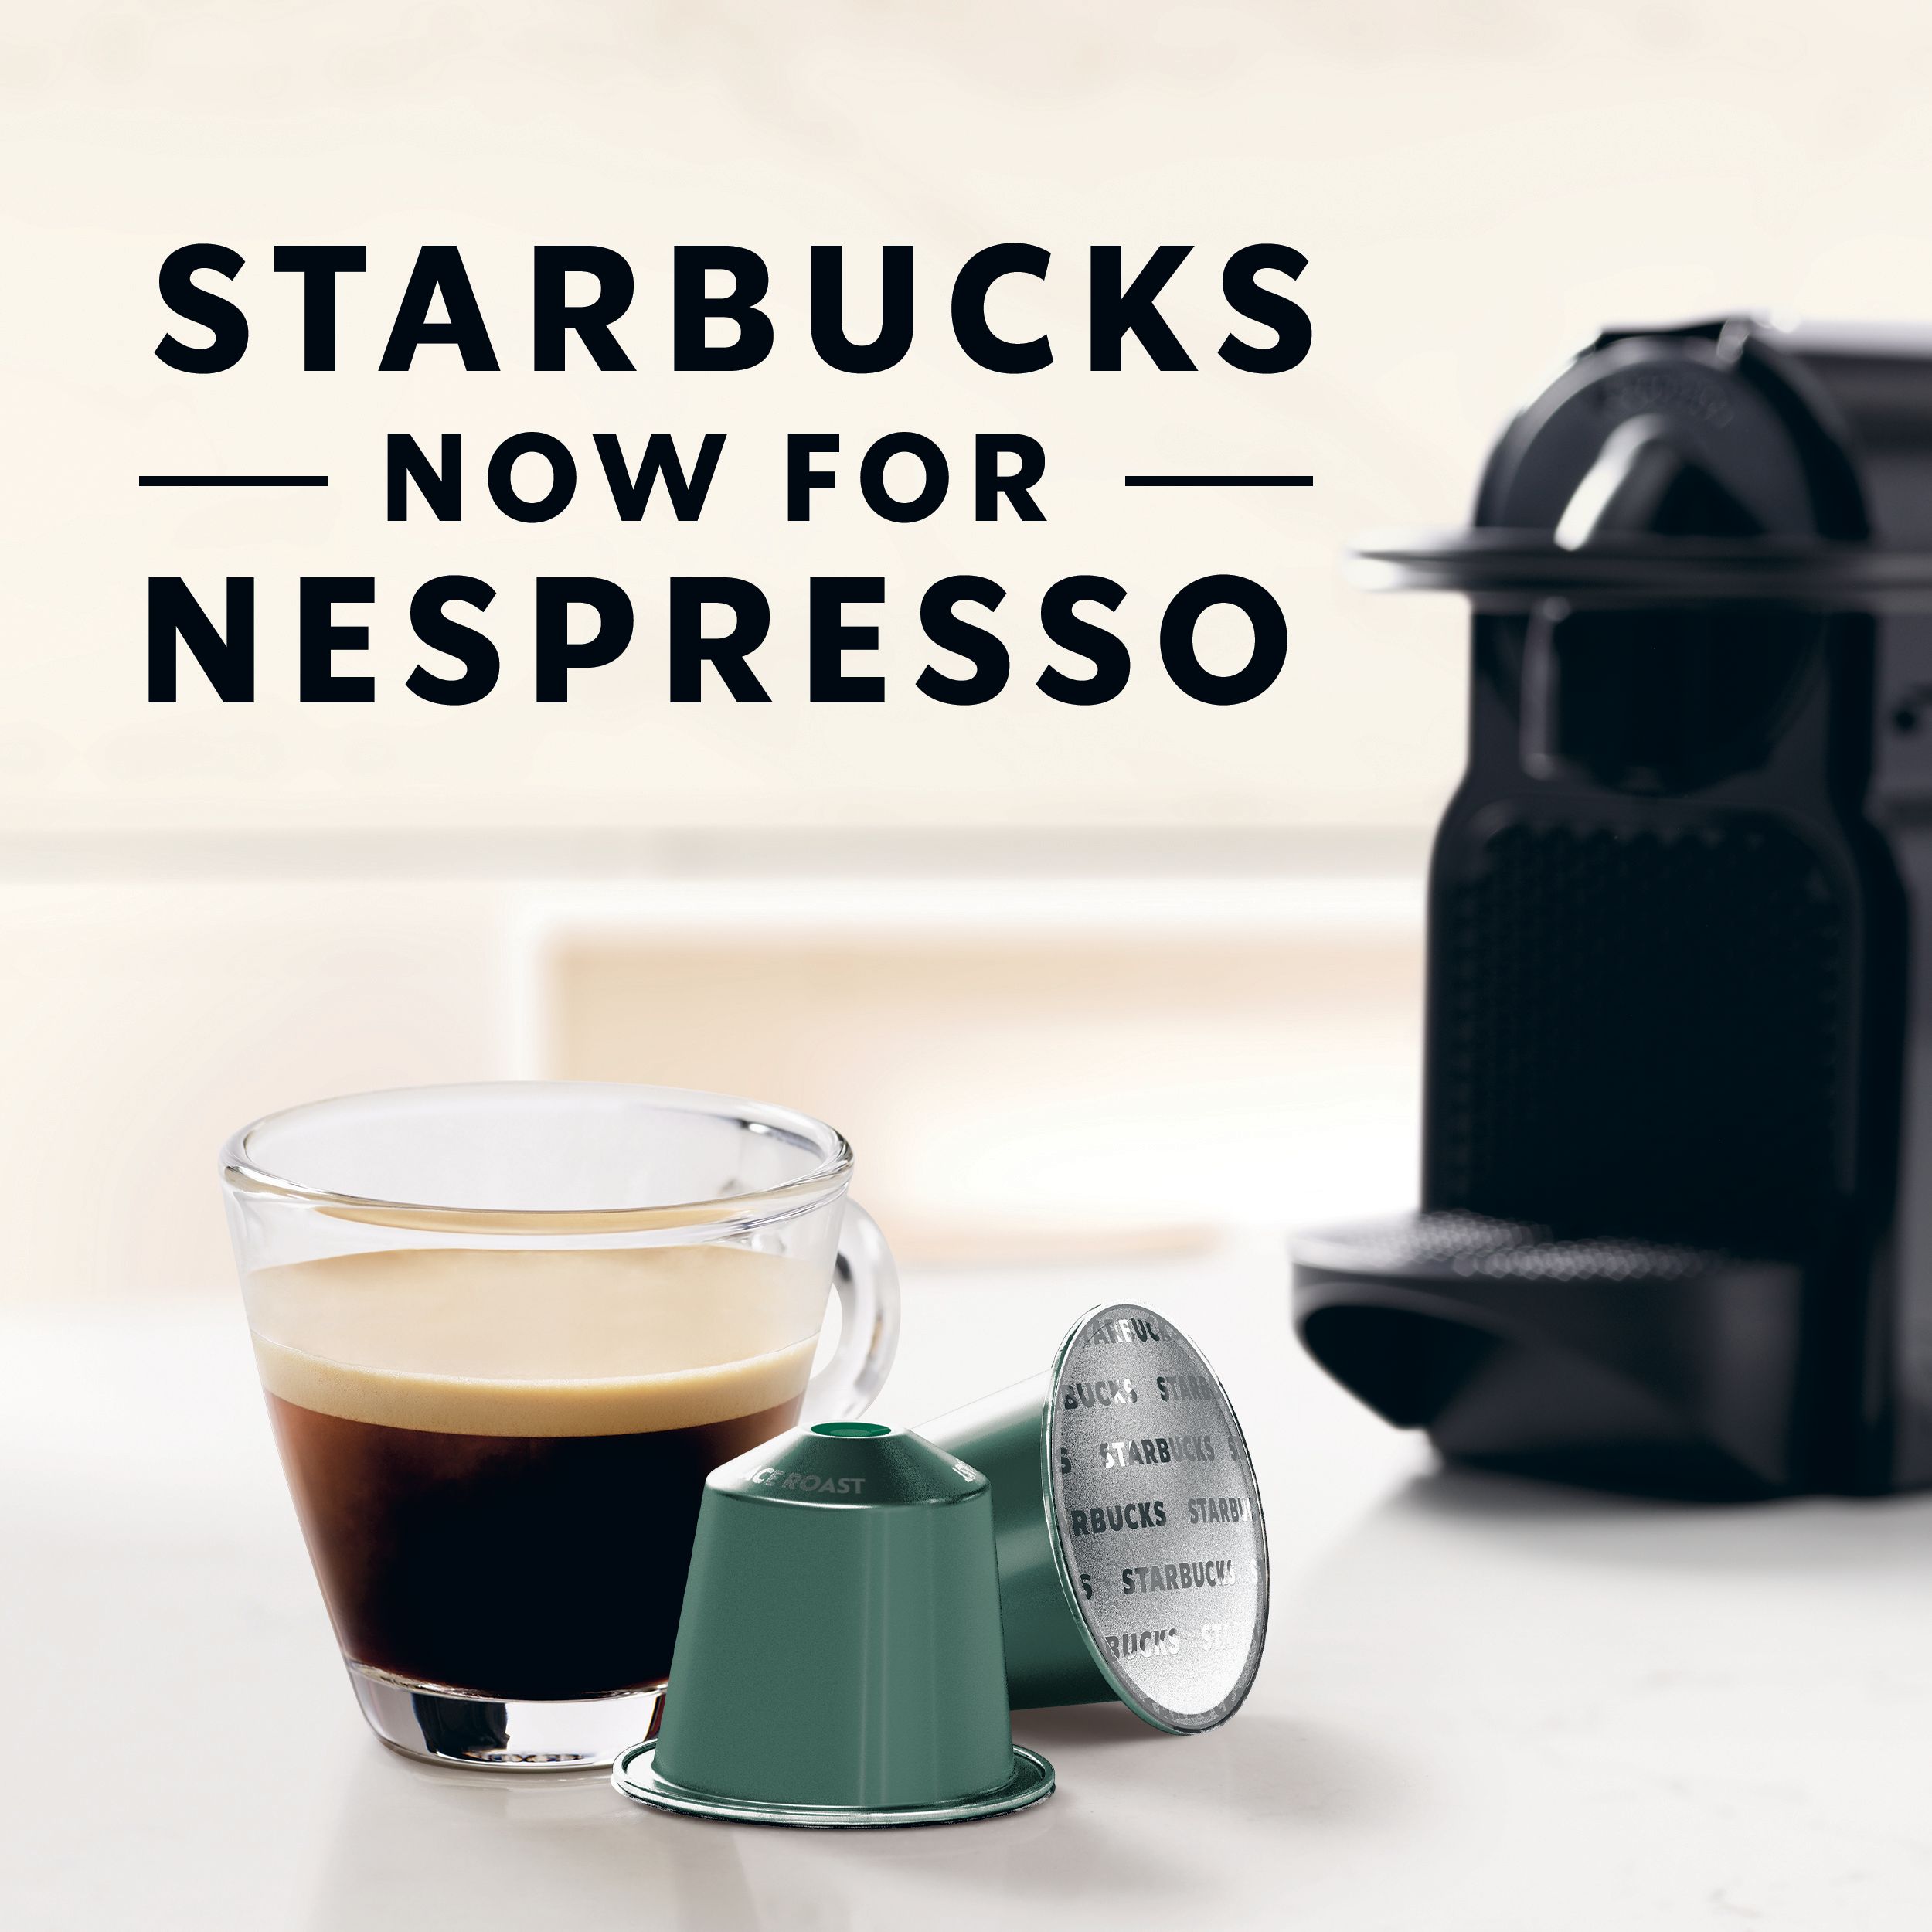 Starbucks by Nespresso Pike Place Roast (10-count single serve capsules compatible with Nespresso Original Line System) - image 2 of 8